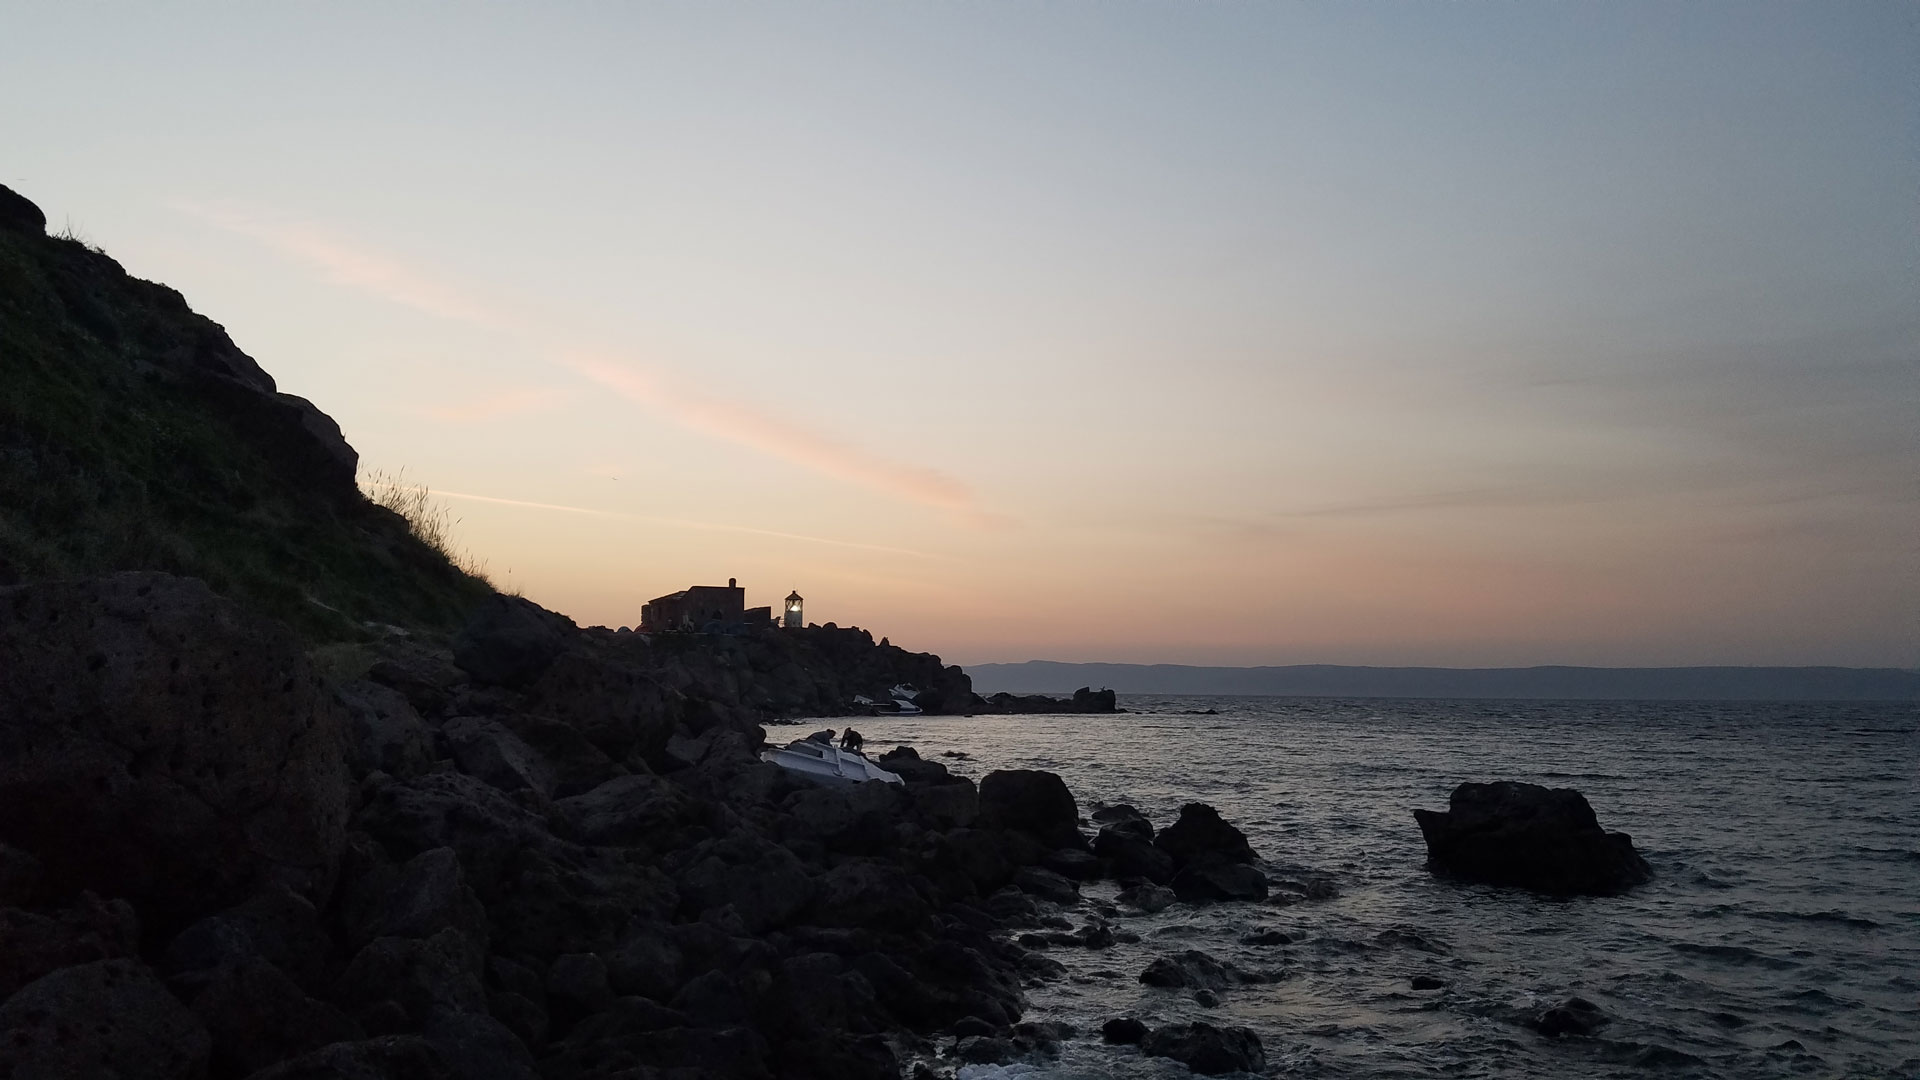 A photo of Koraas lighthouse silhouetted against the setting sun.